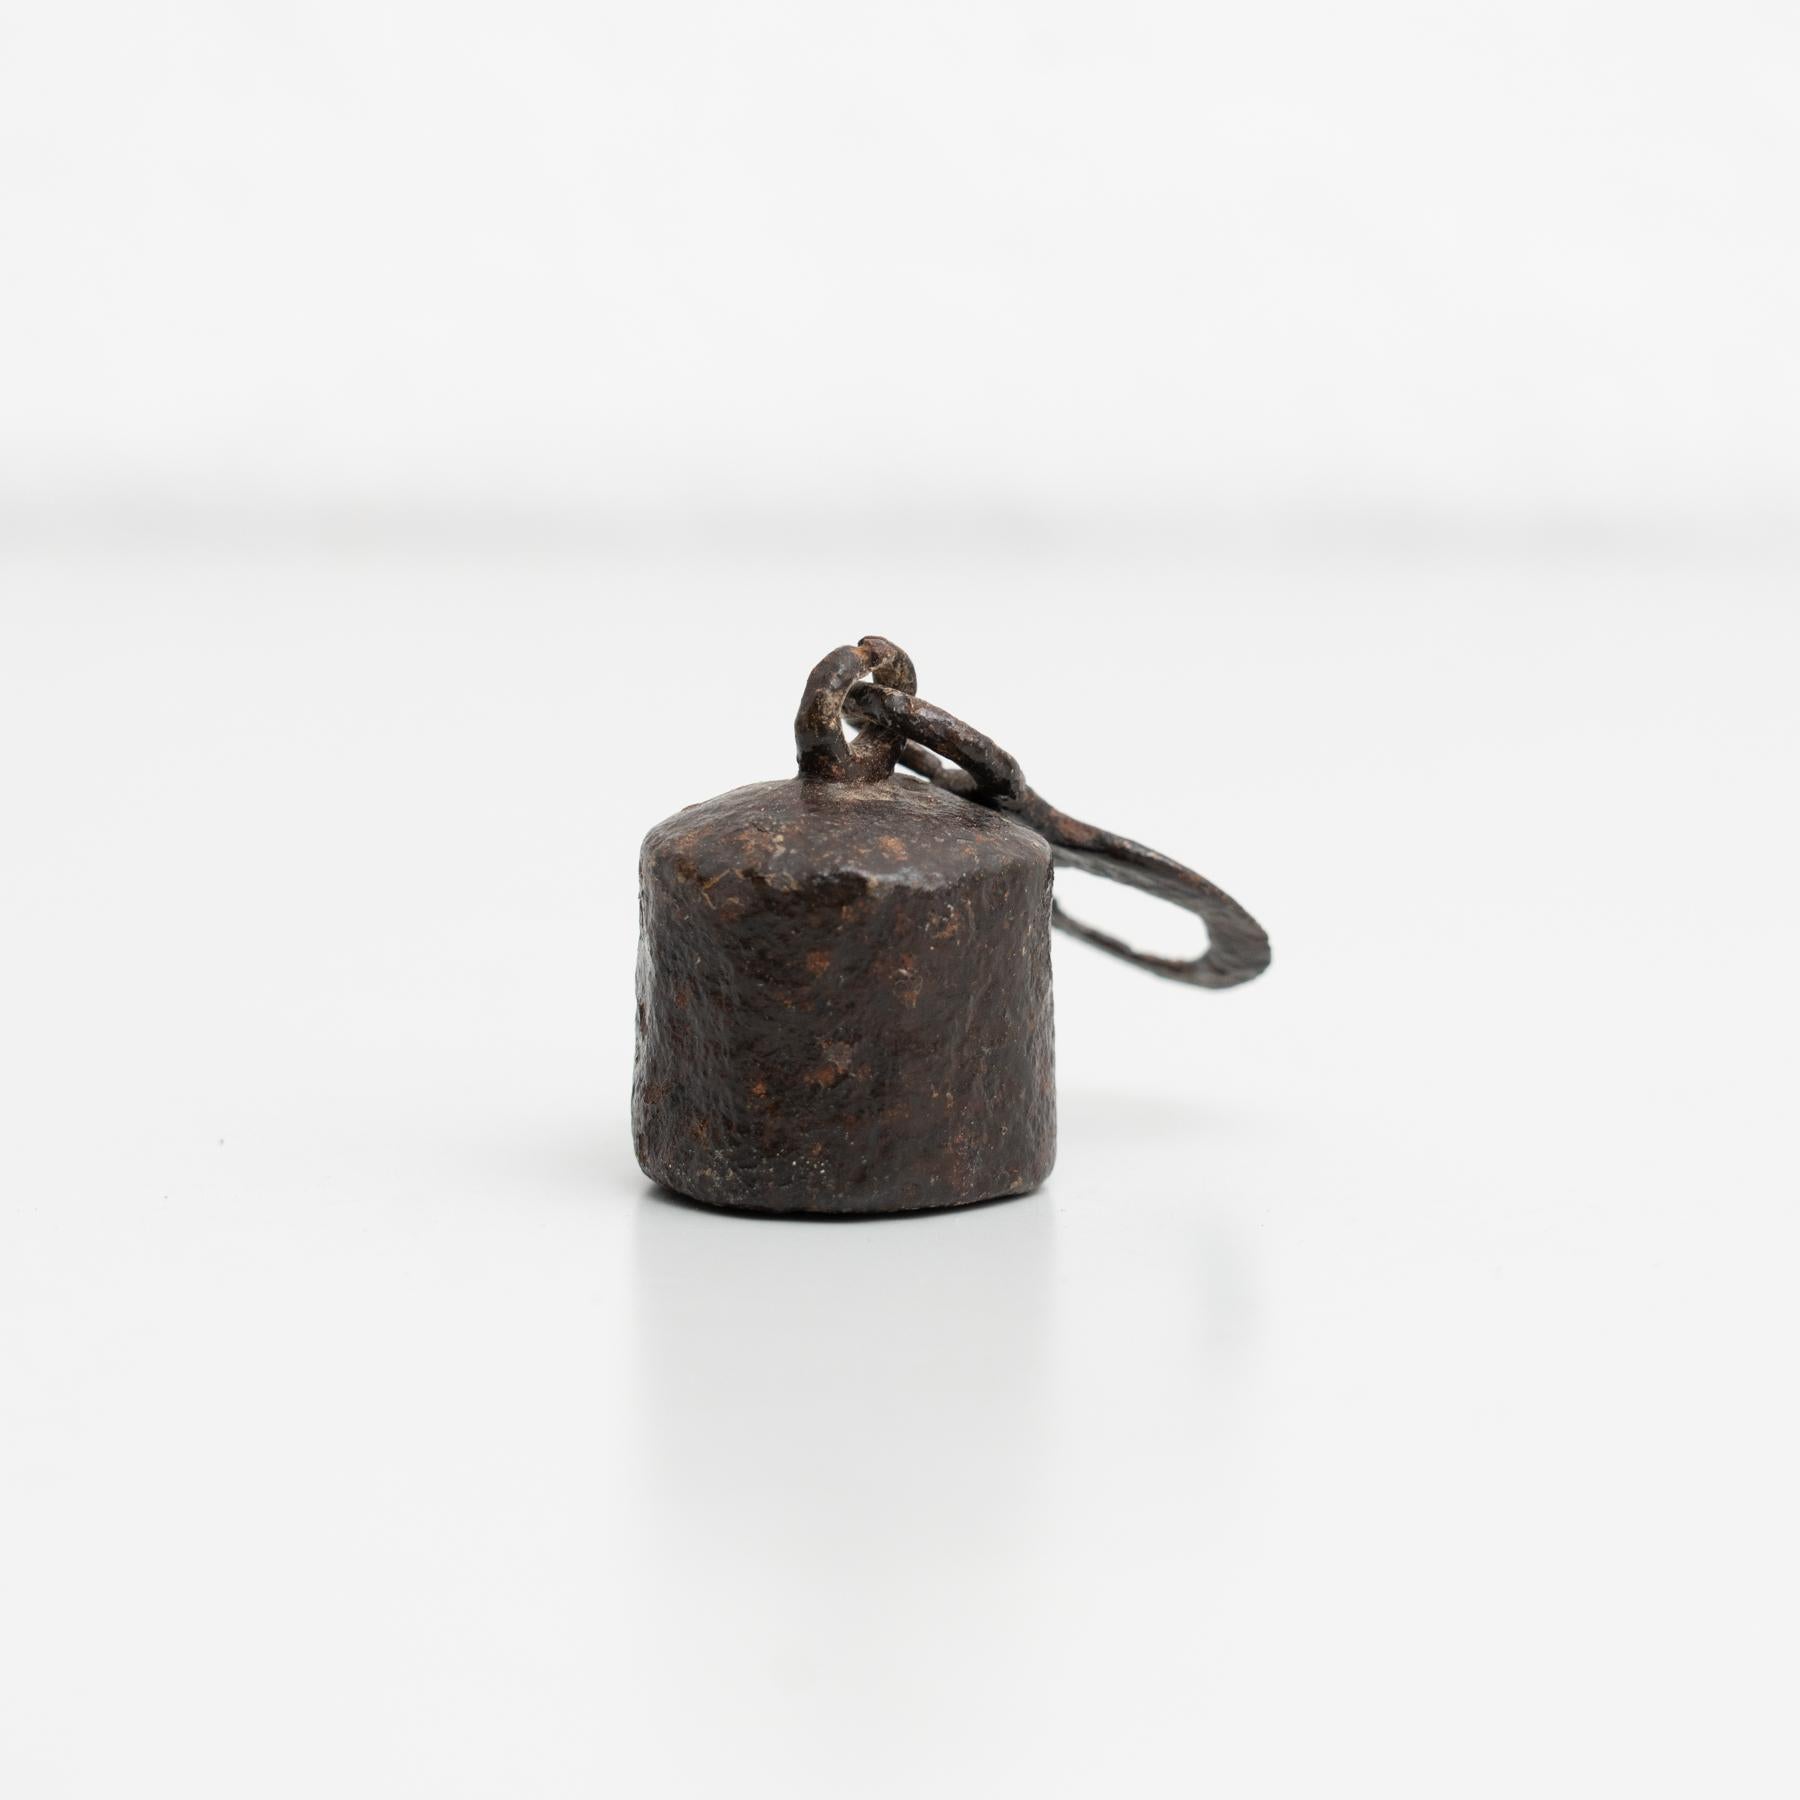 Antique scale weight made in Spain by unknown manufacturer, circa 1930.

In original condition, with minor wear consistent with age and use, preserving a beautiful patina.

Materials:
Metal